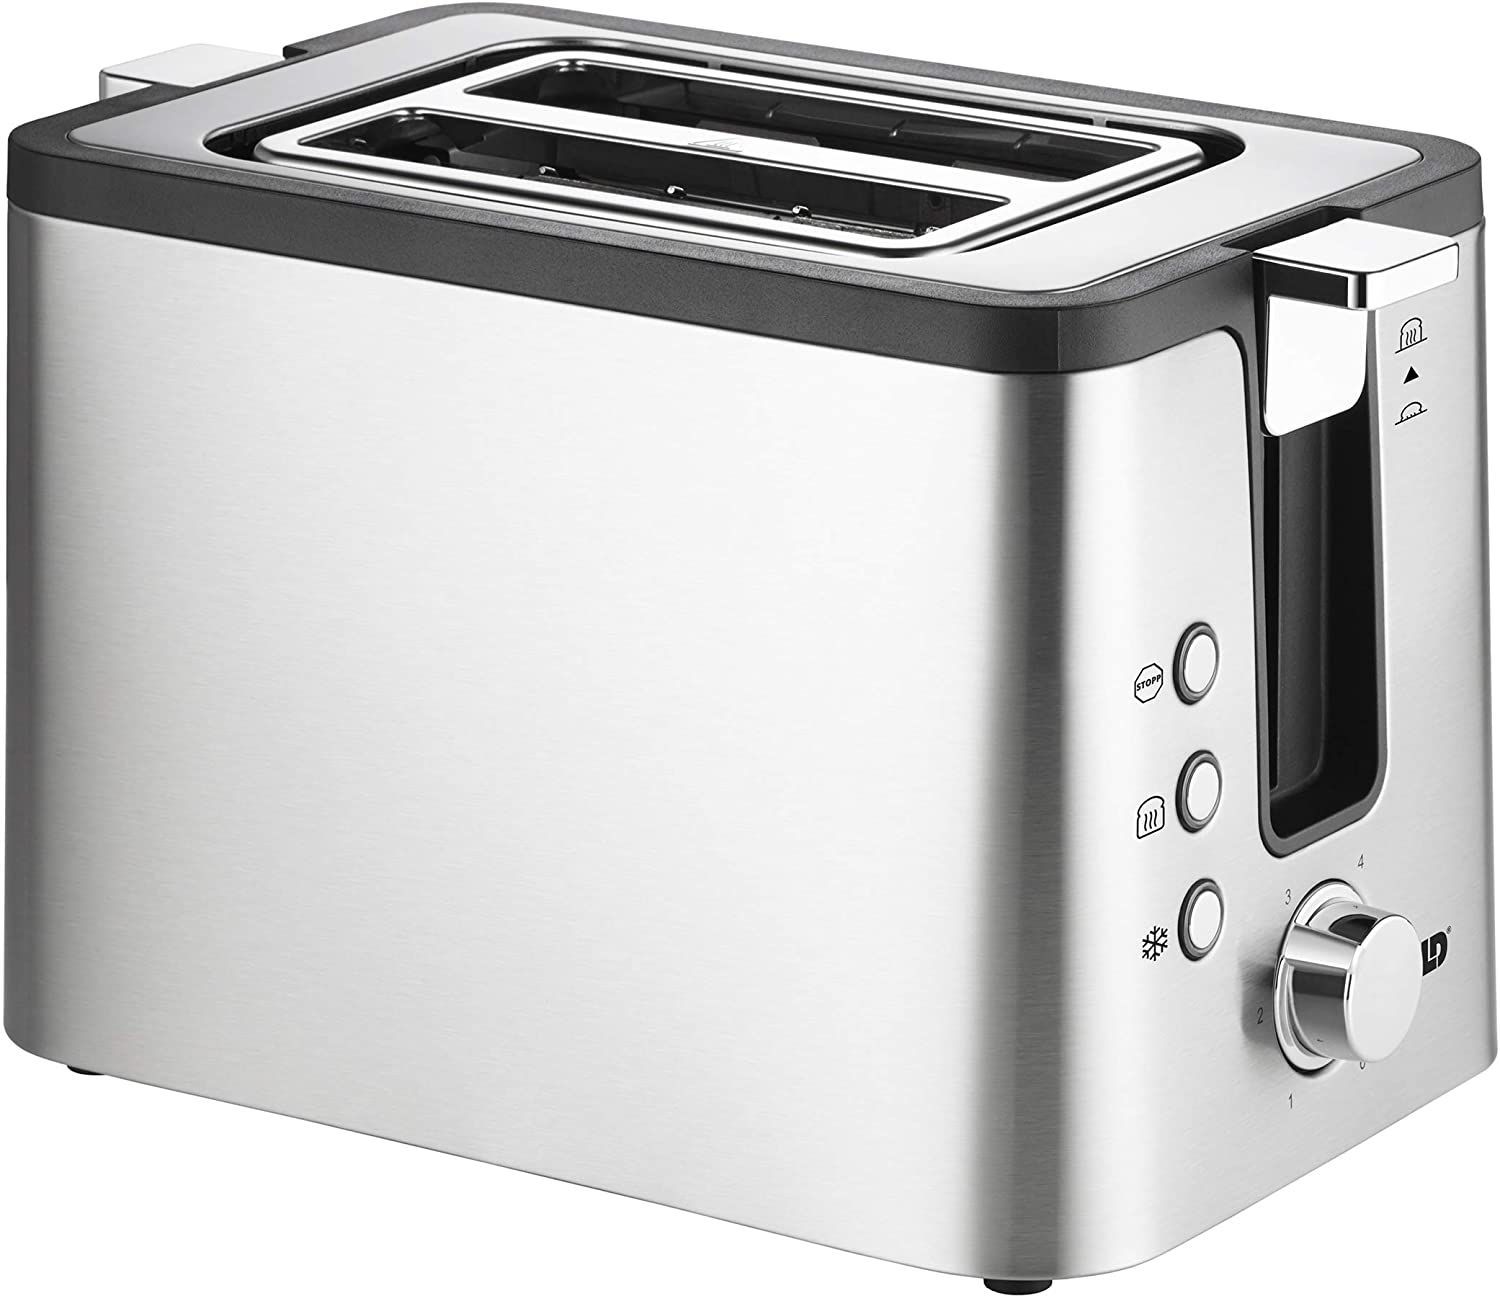 Unold 38215 2 Compact Toaster with Built-In Bread Attachment Stainless Steel